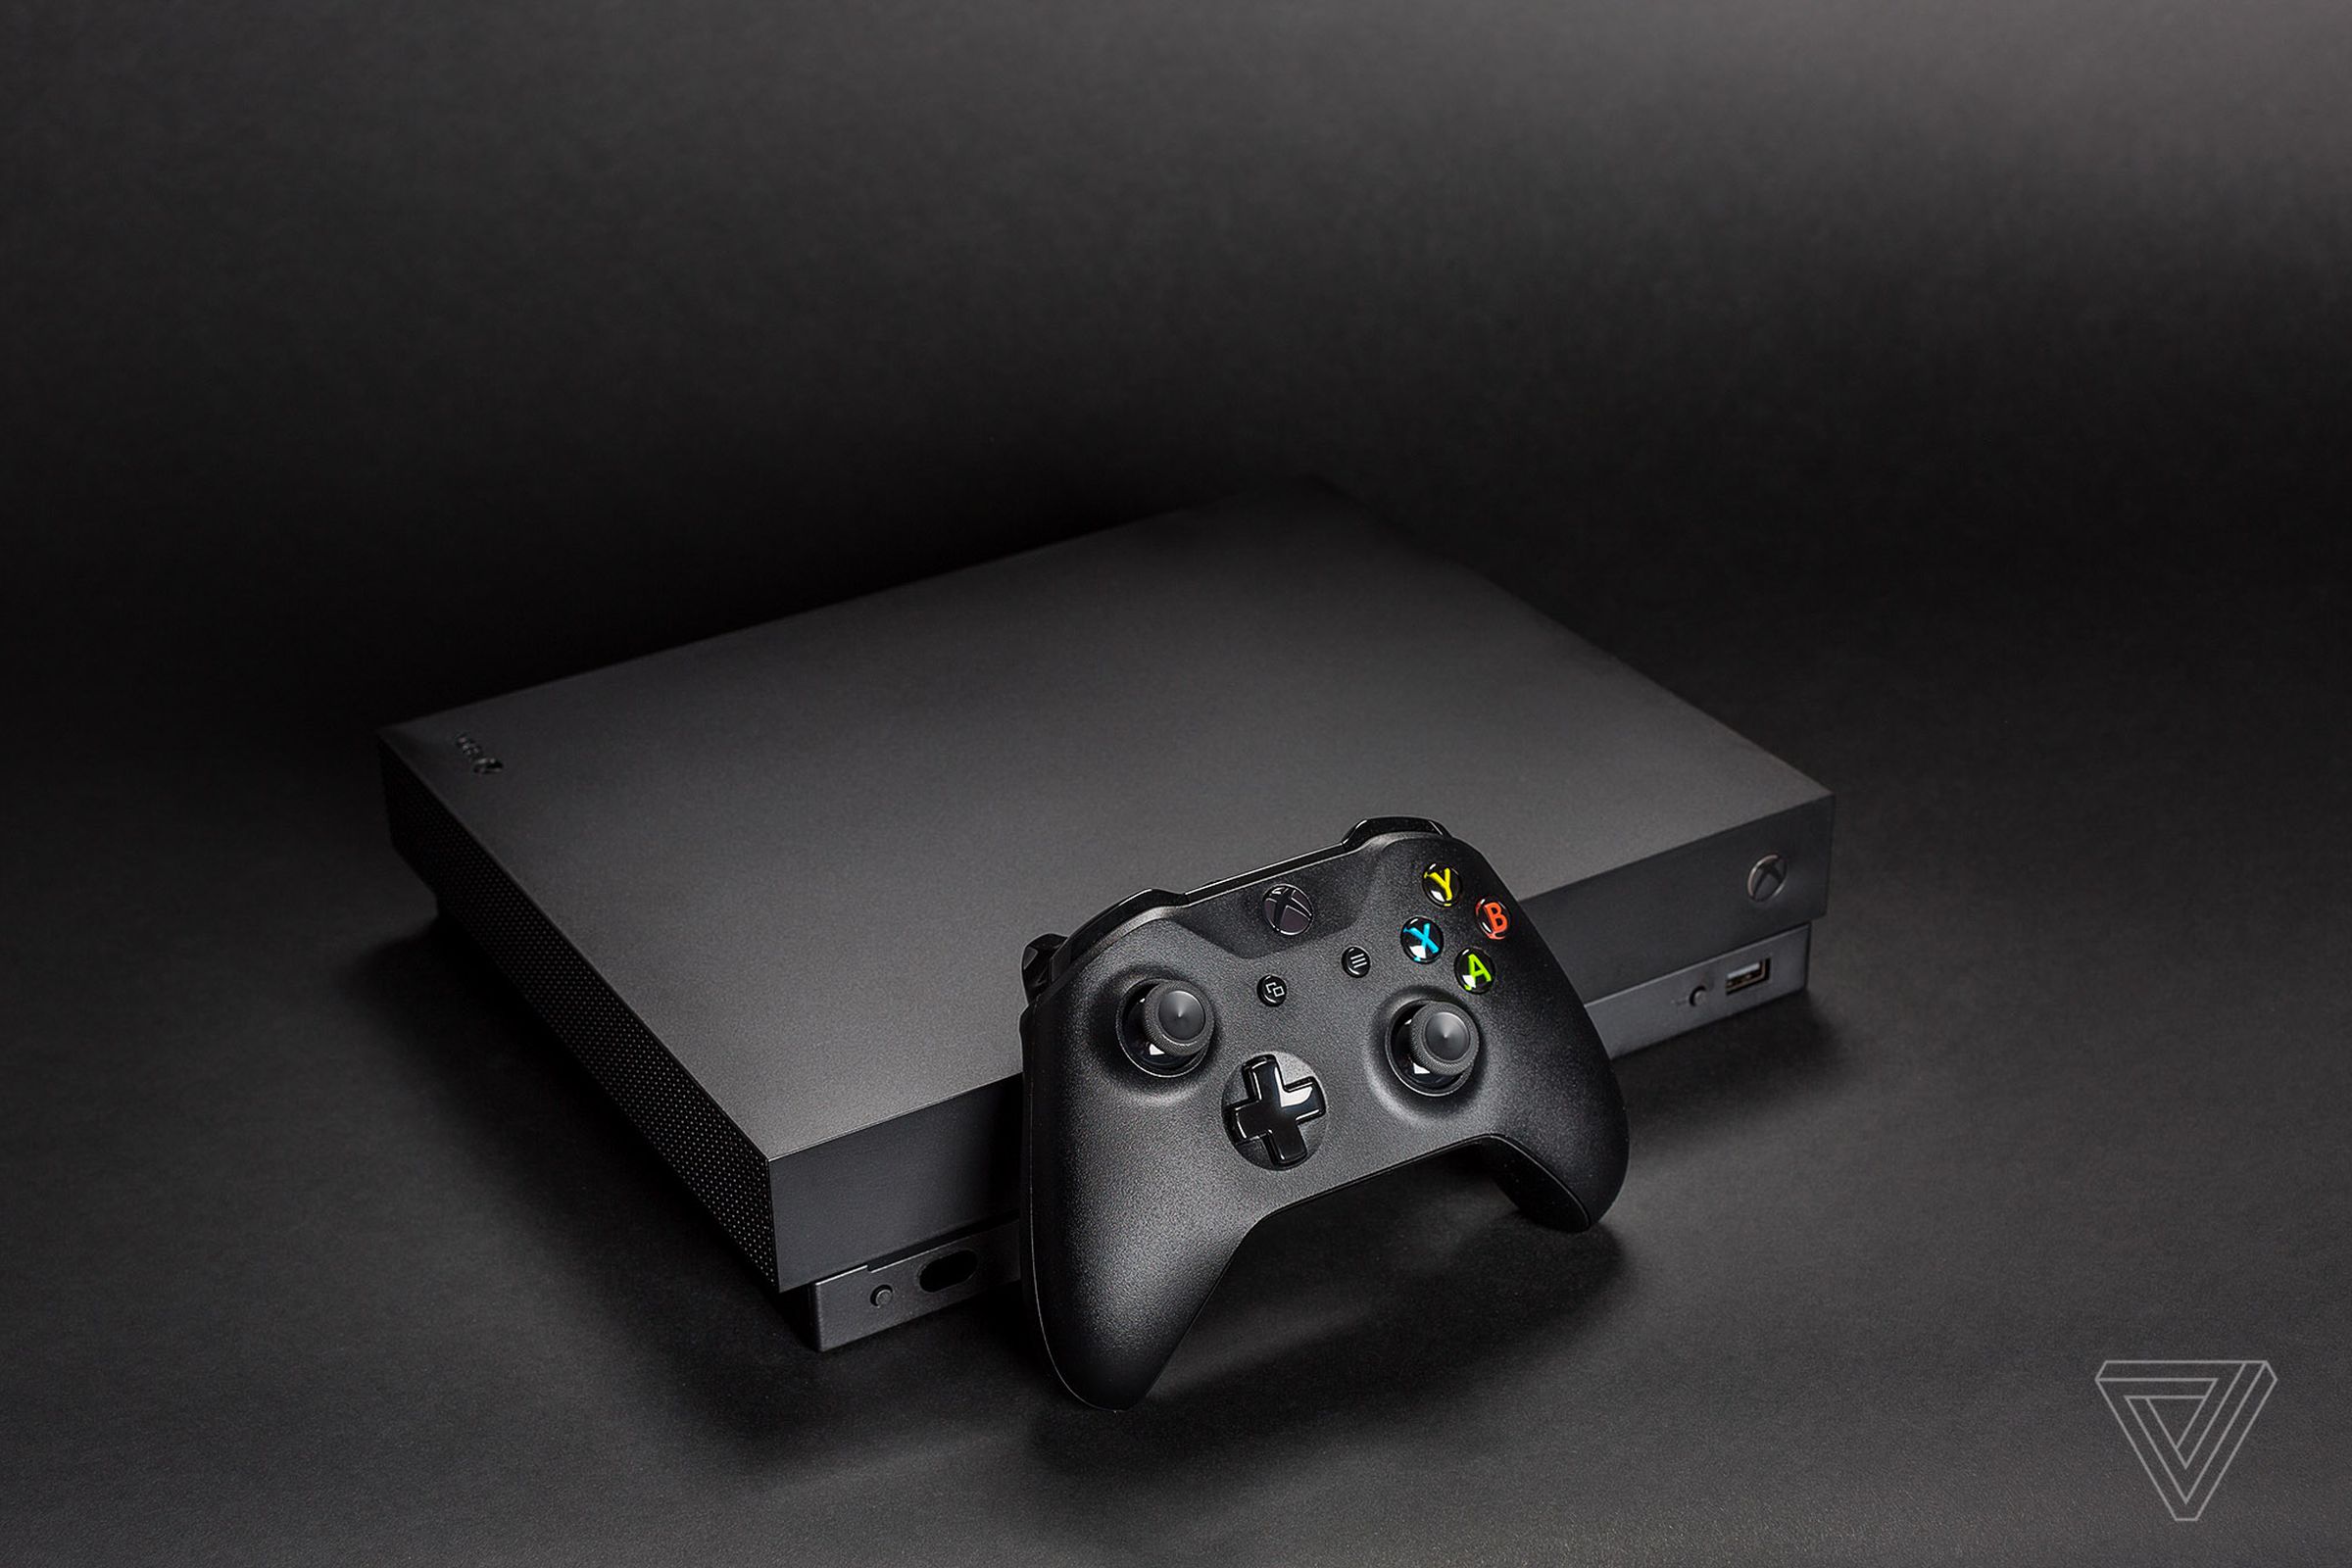 The 4K-capable Xbox One X.